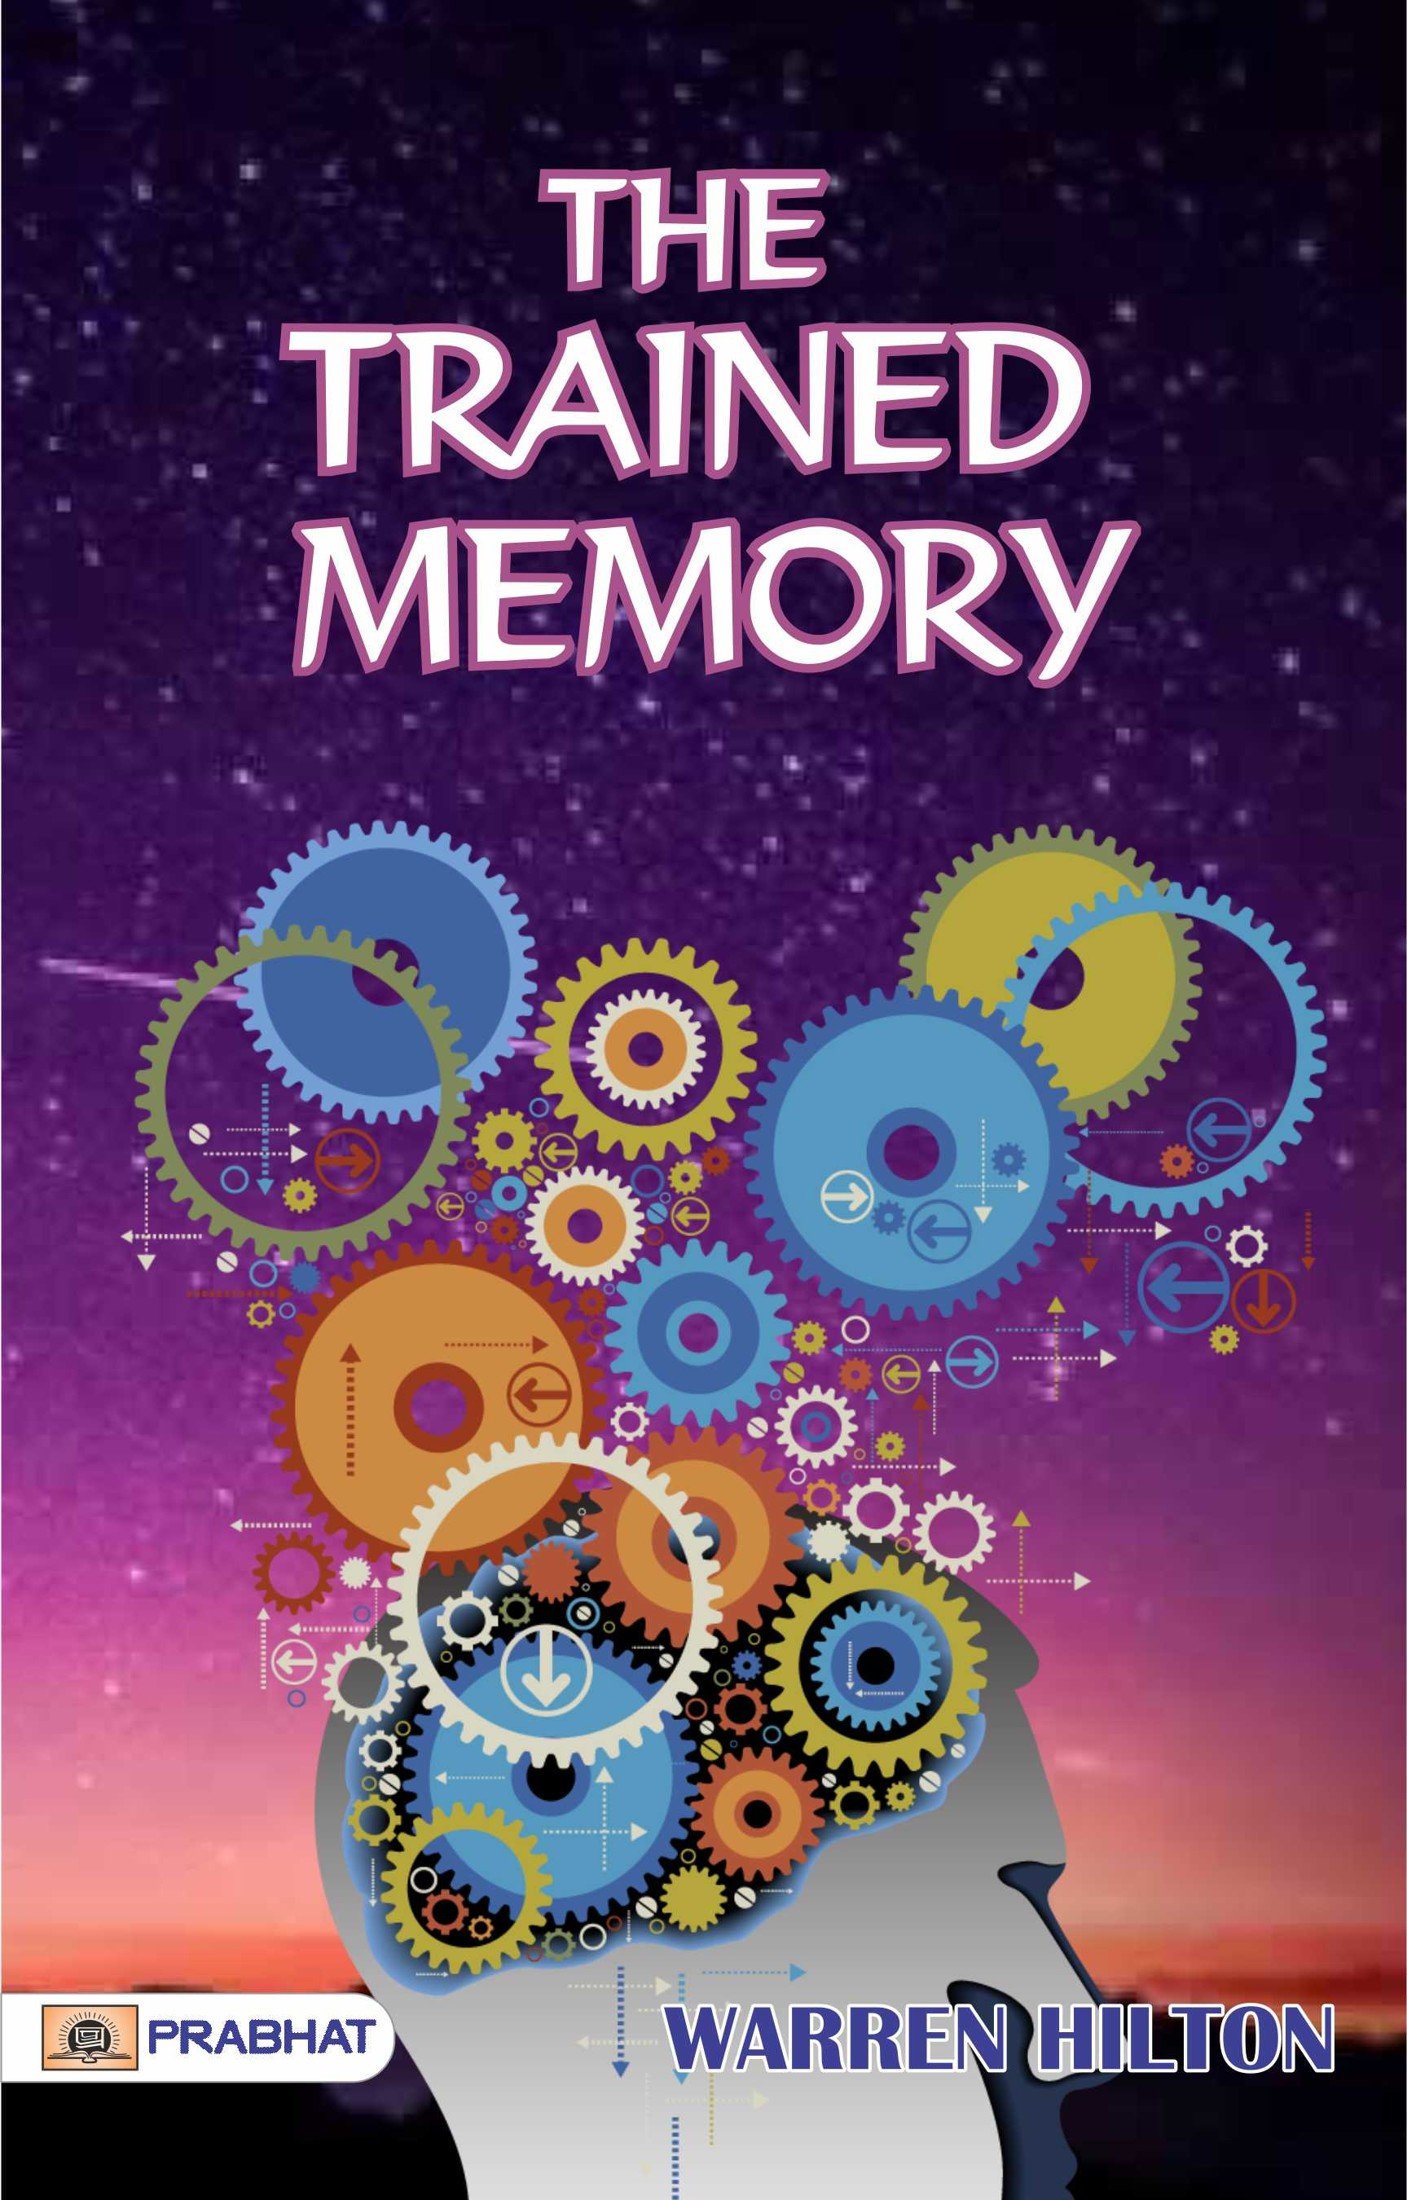 The Trained Memory: Warren Hilton's Guide to Enhancing Memory Skills (Warren Buffett Investment Strategy Book)